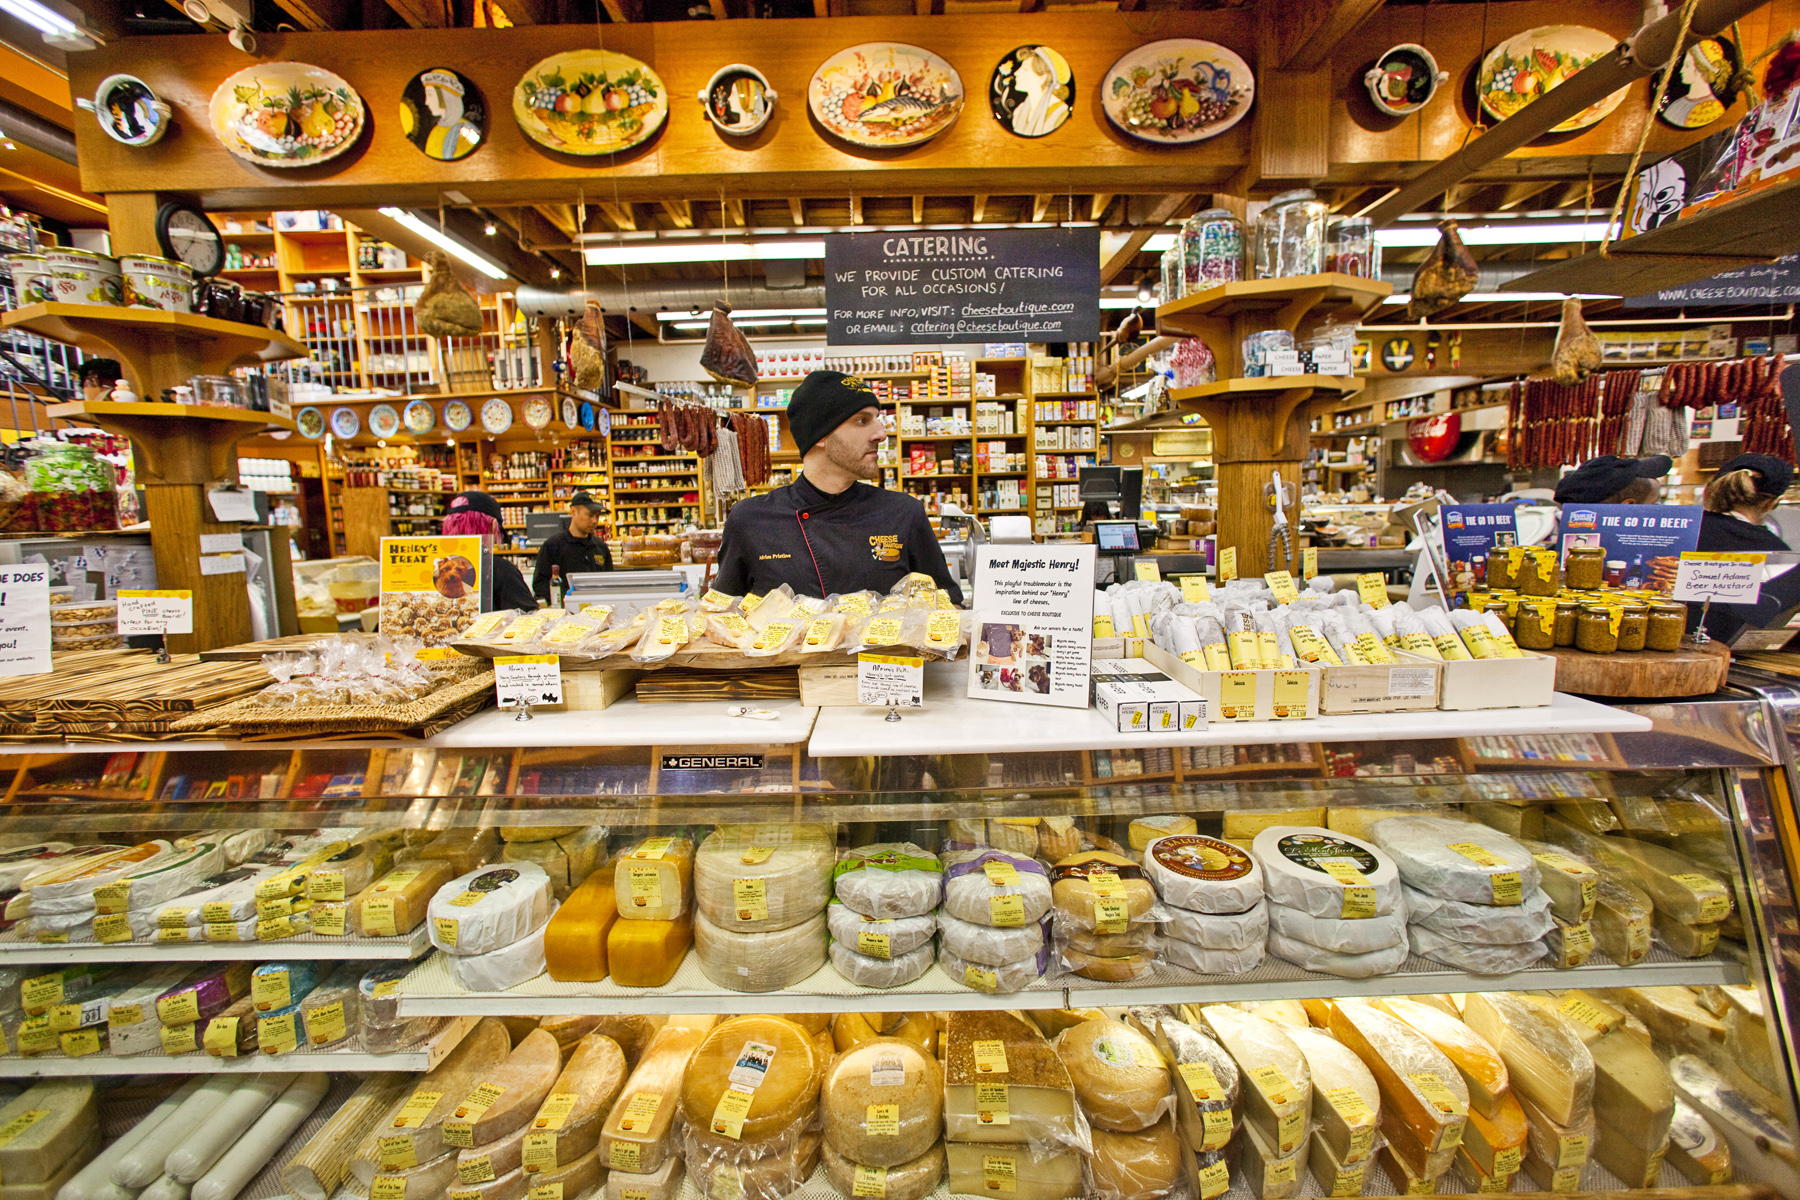 A worker looks away from the camera behind a deli case filled with cheese, with more cheese all around.